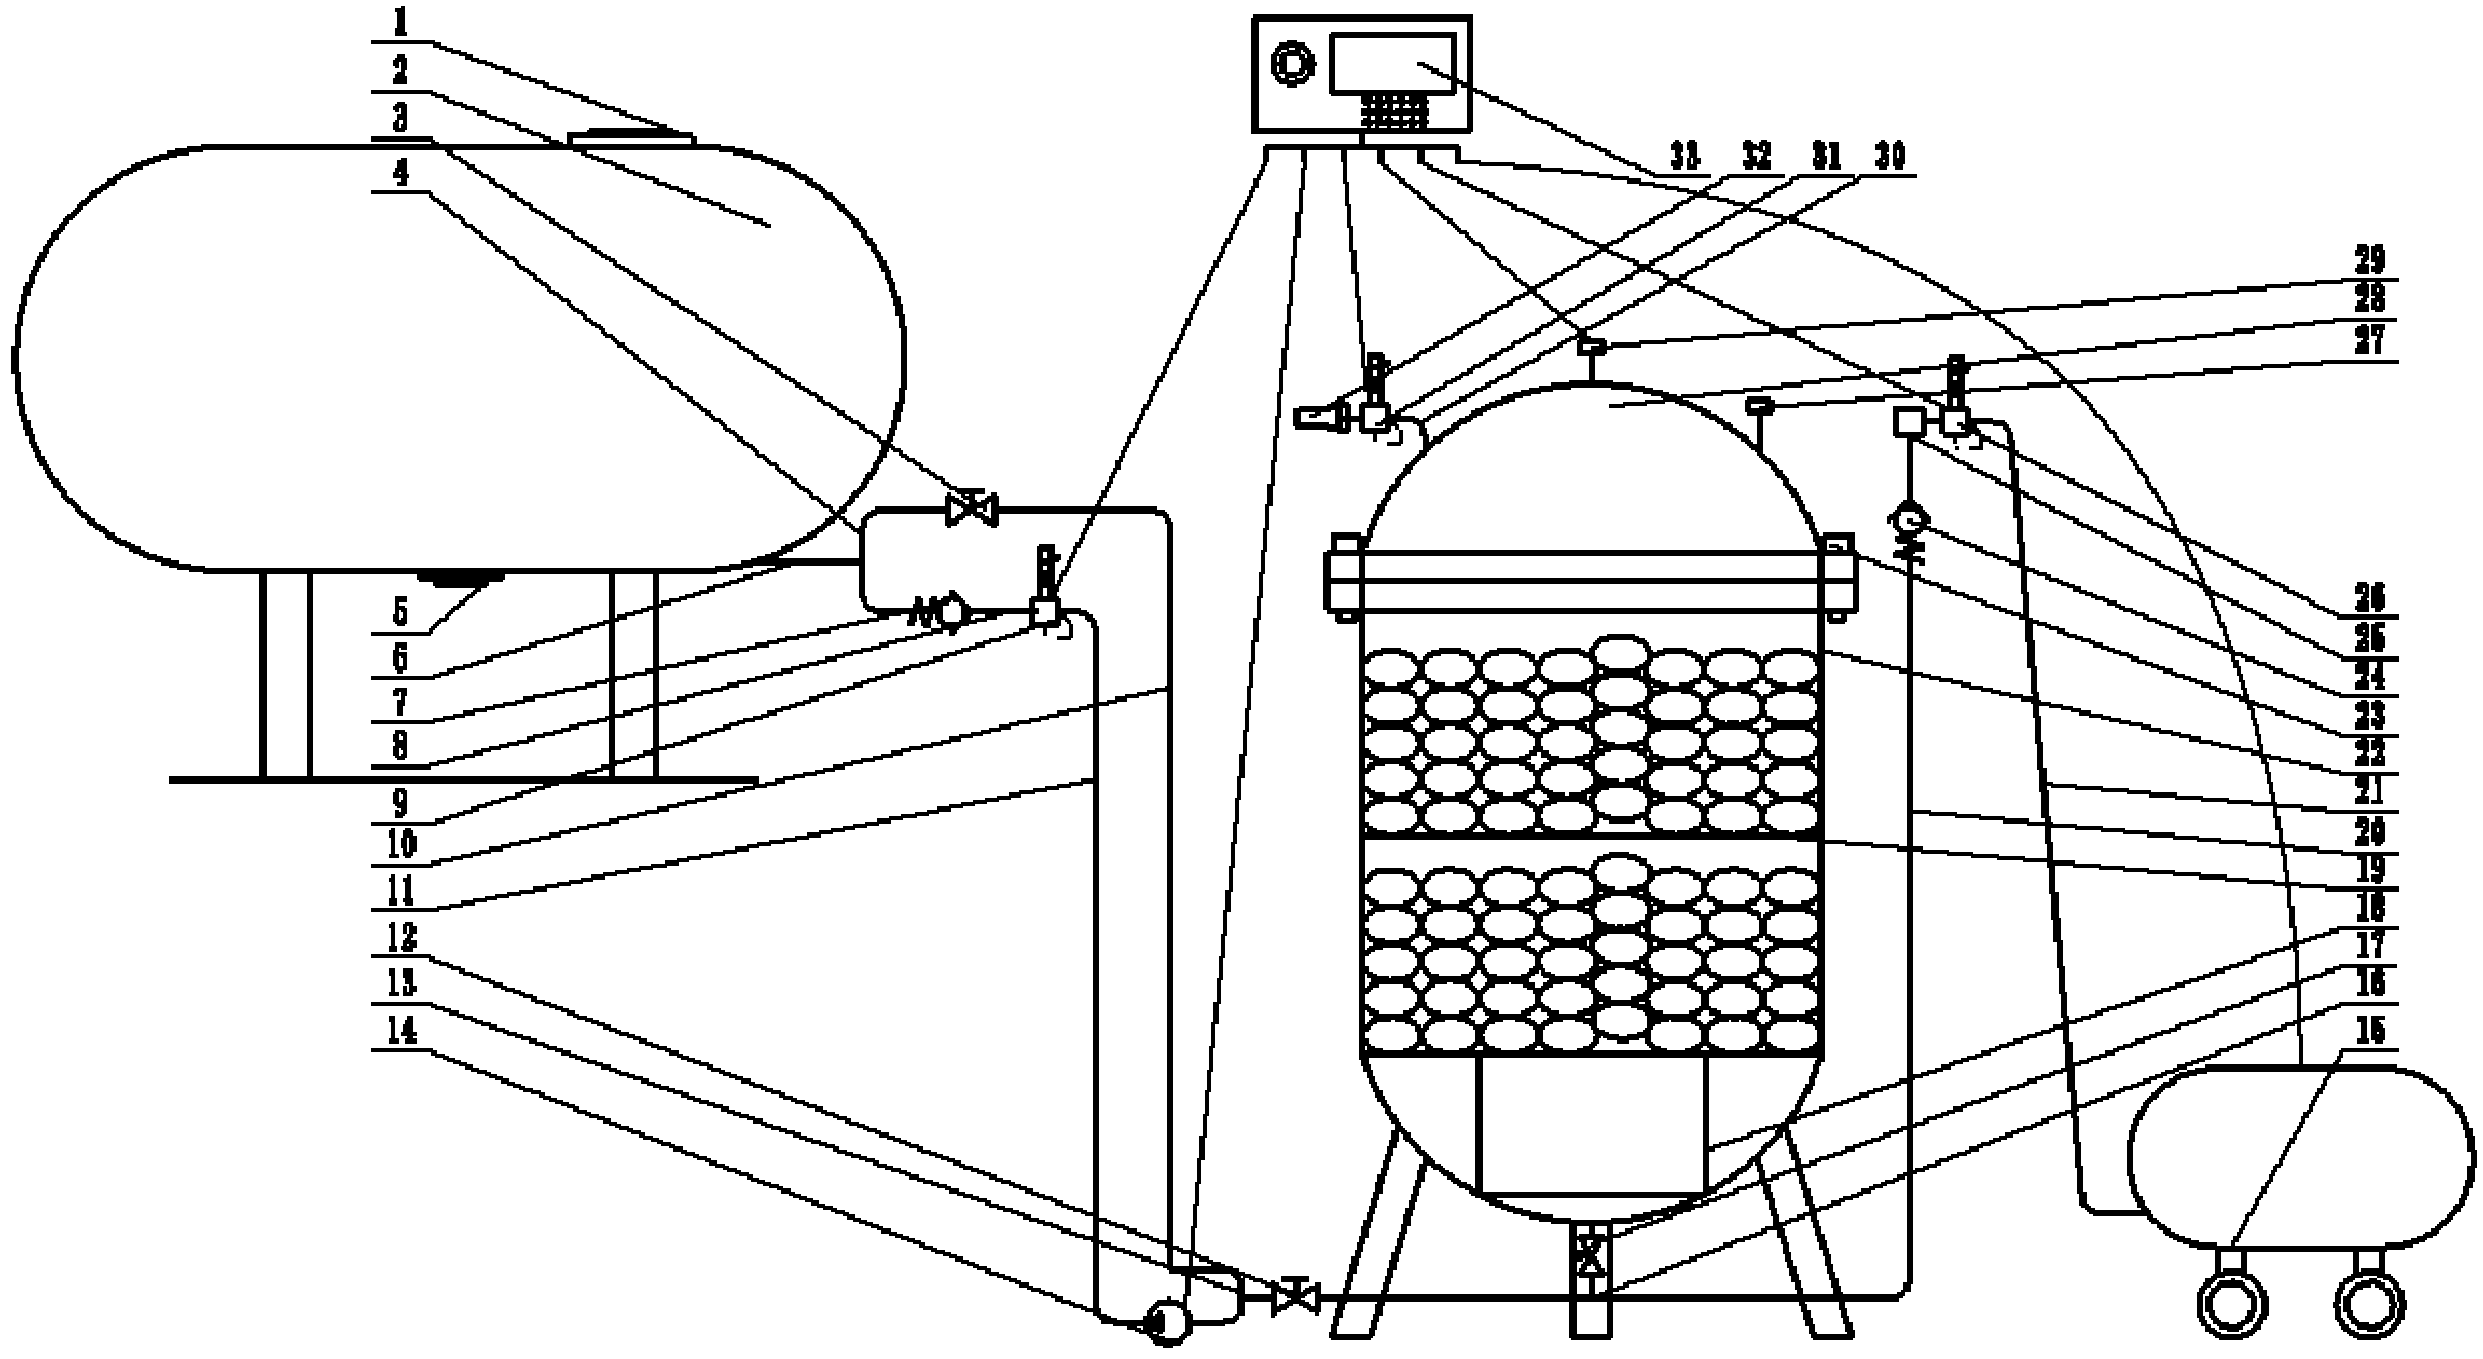 Device for pickling eggs